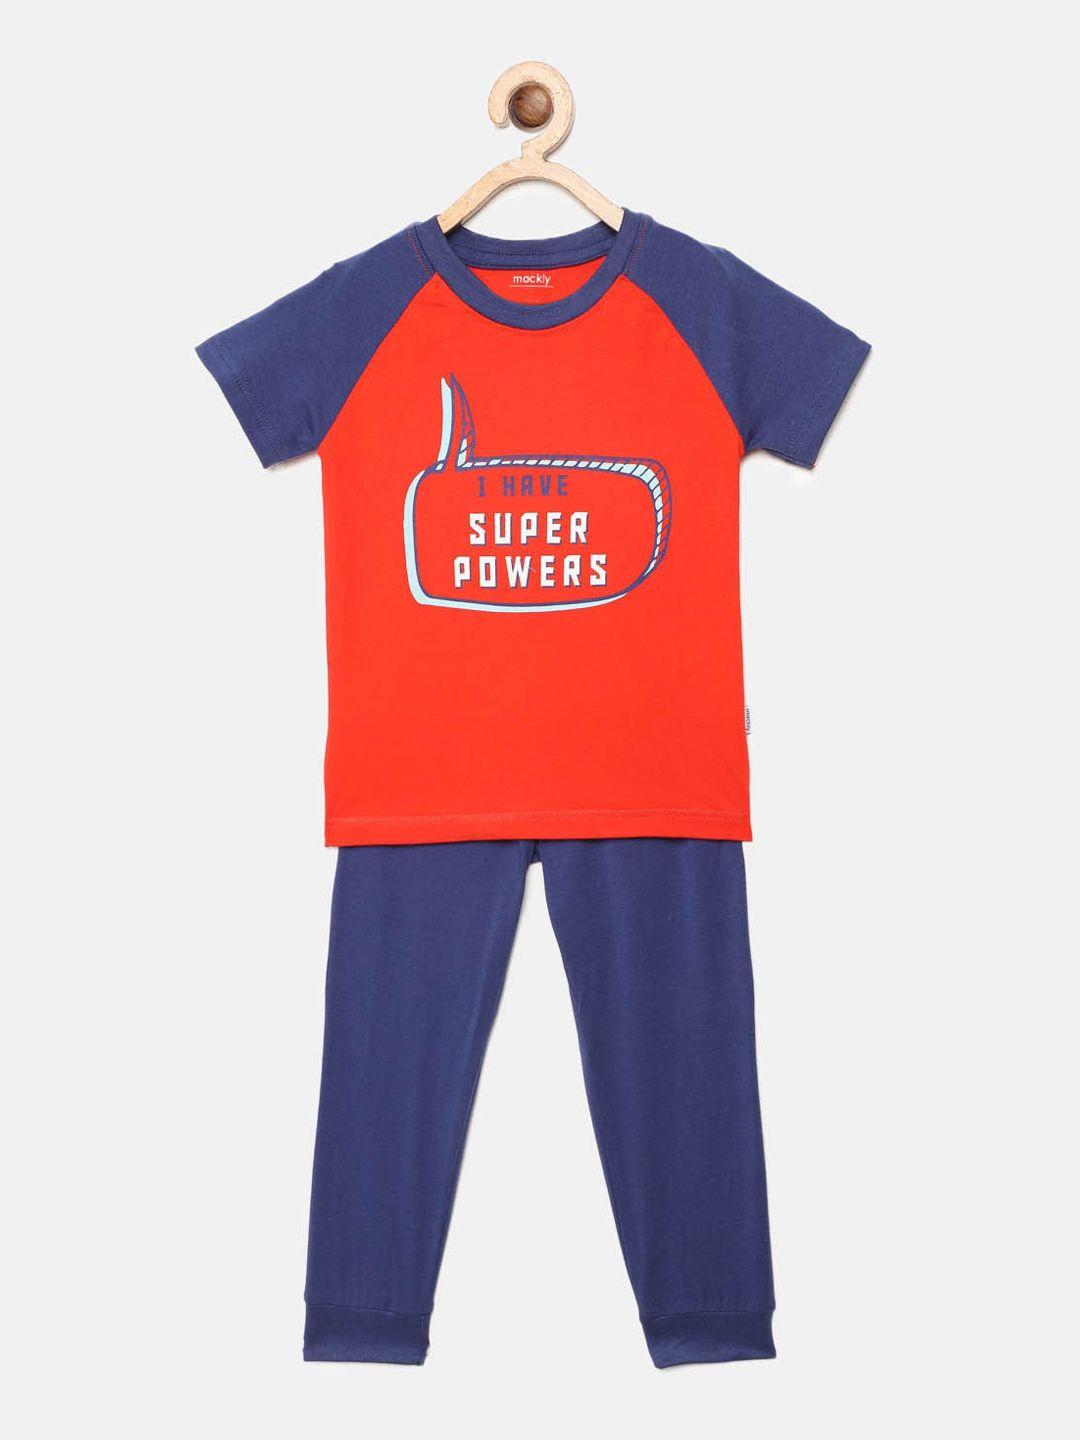 mackly boys red & navy blue printed night suit